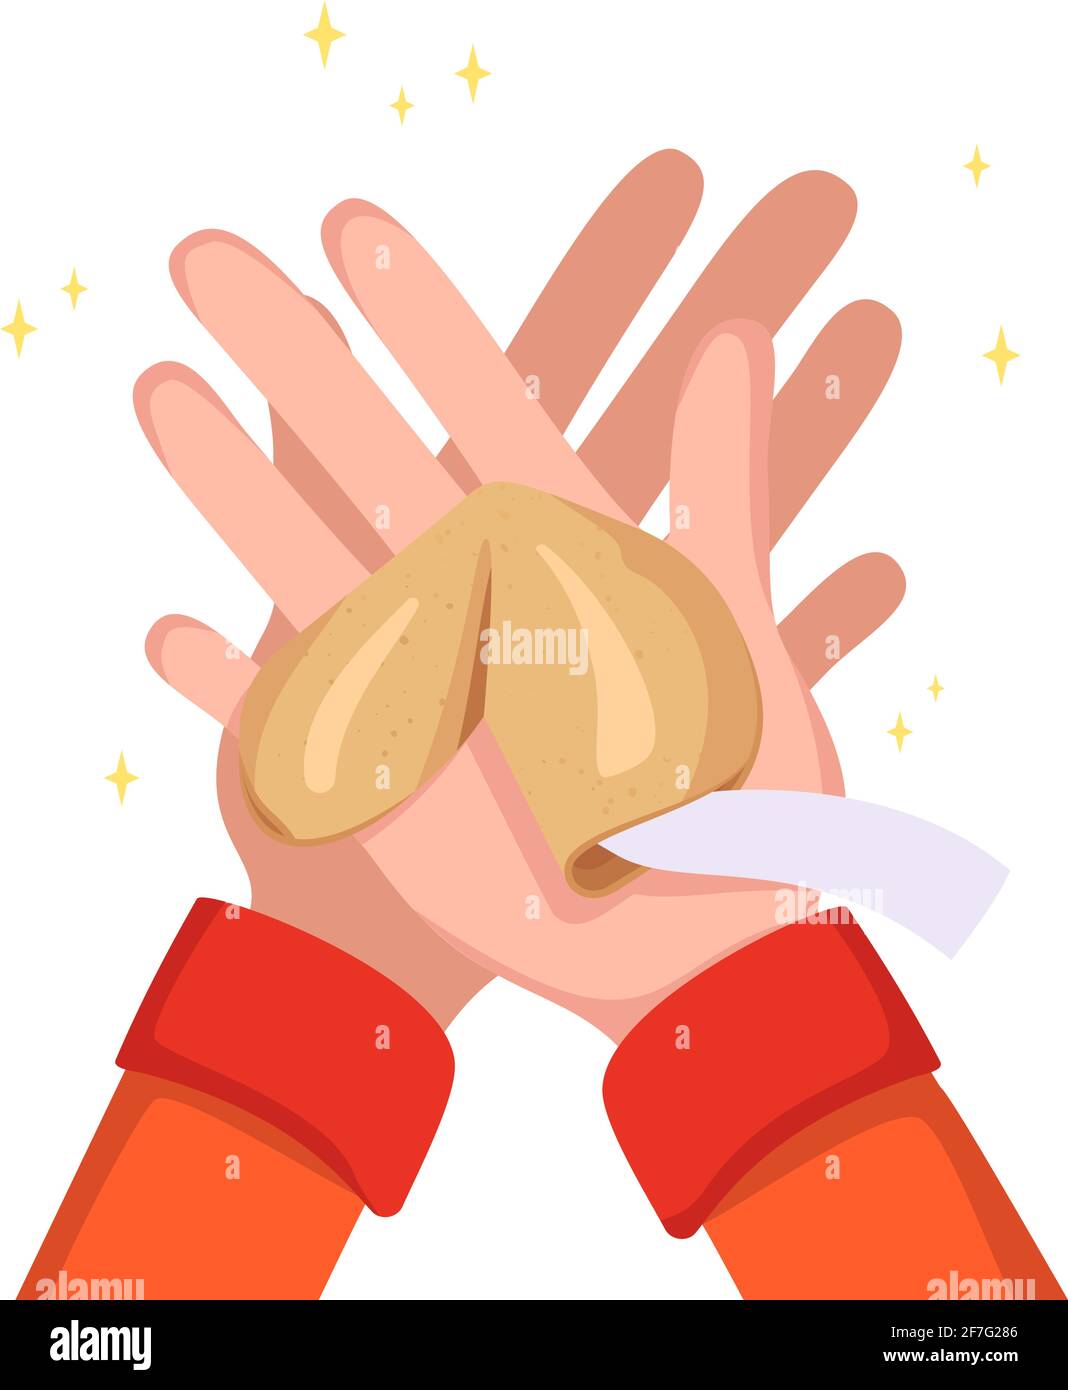 Hands hold Chinese fortune cookies. Pastries with white templates, pieces of paper for good luck. Sweets for the new year, gift or holiday Stock Vector